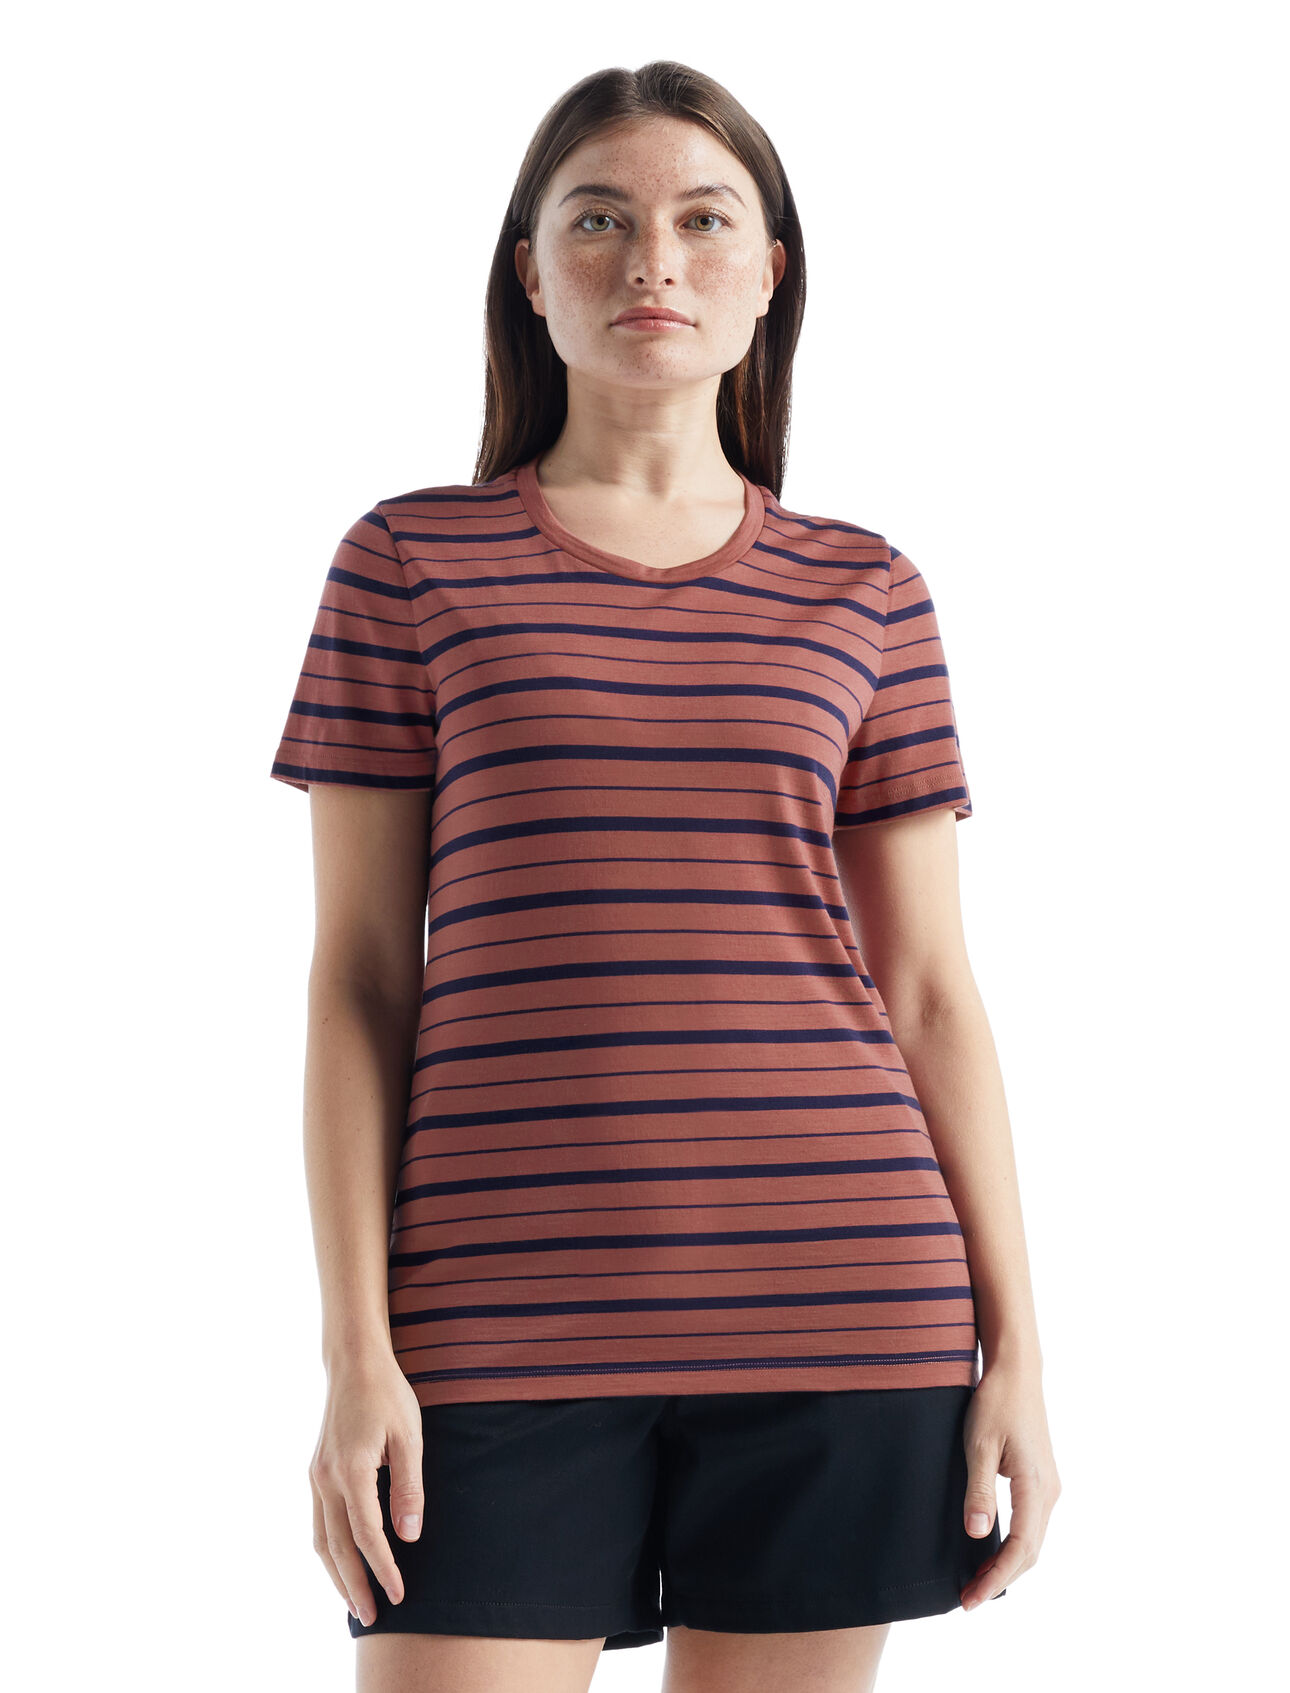 Womens Merino Wave Short Sleeve Stripe T-Shirt A lightweight merino-blend tee with classic style that's perfect for warm weather, the Wave Short Sleeve Tee Stripe features our breathable, all-natural Cool-Lite™ jersey fabric.